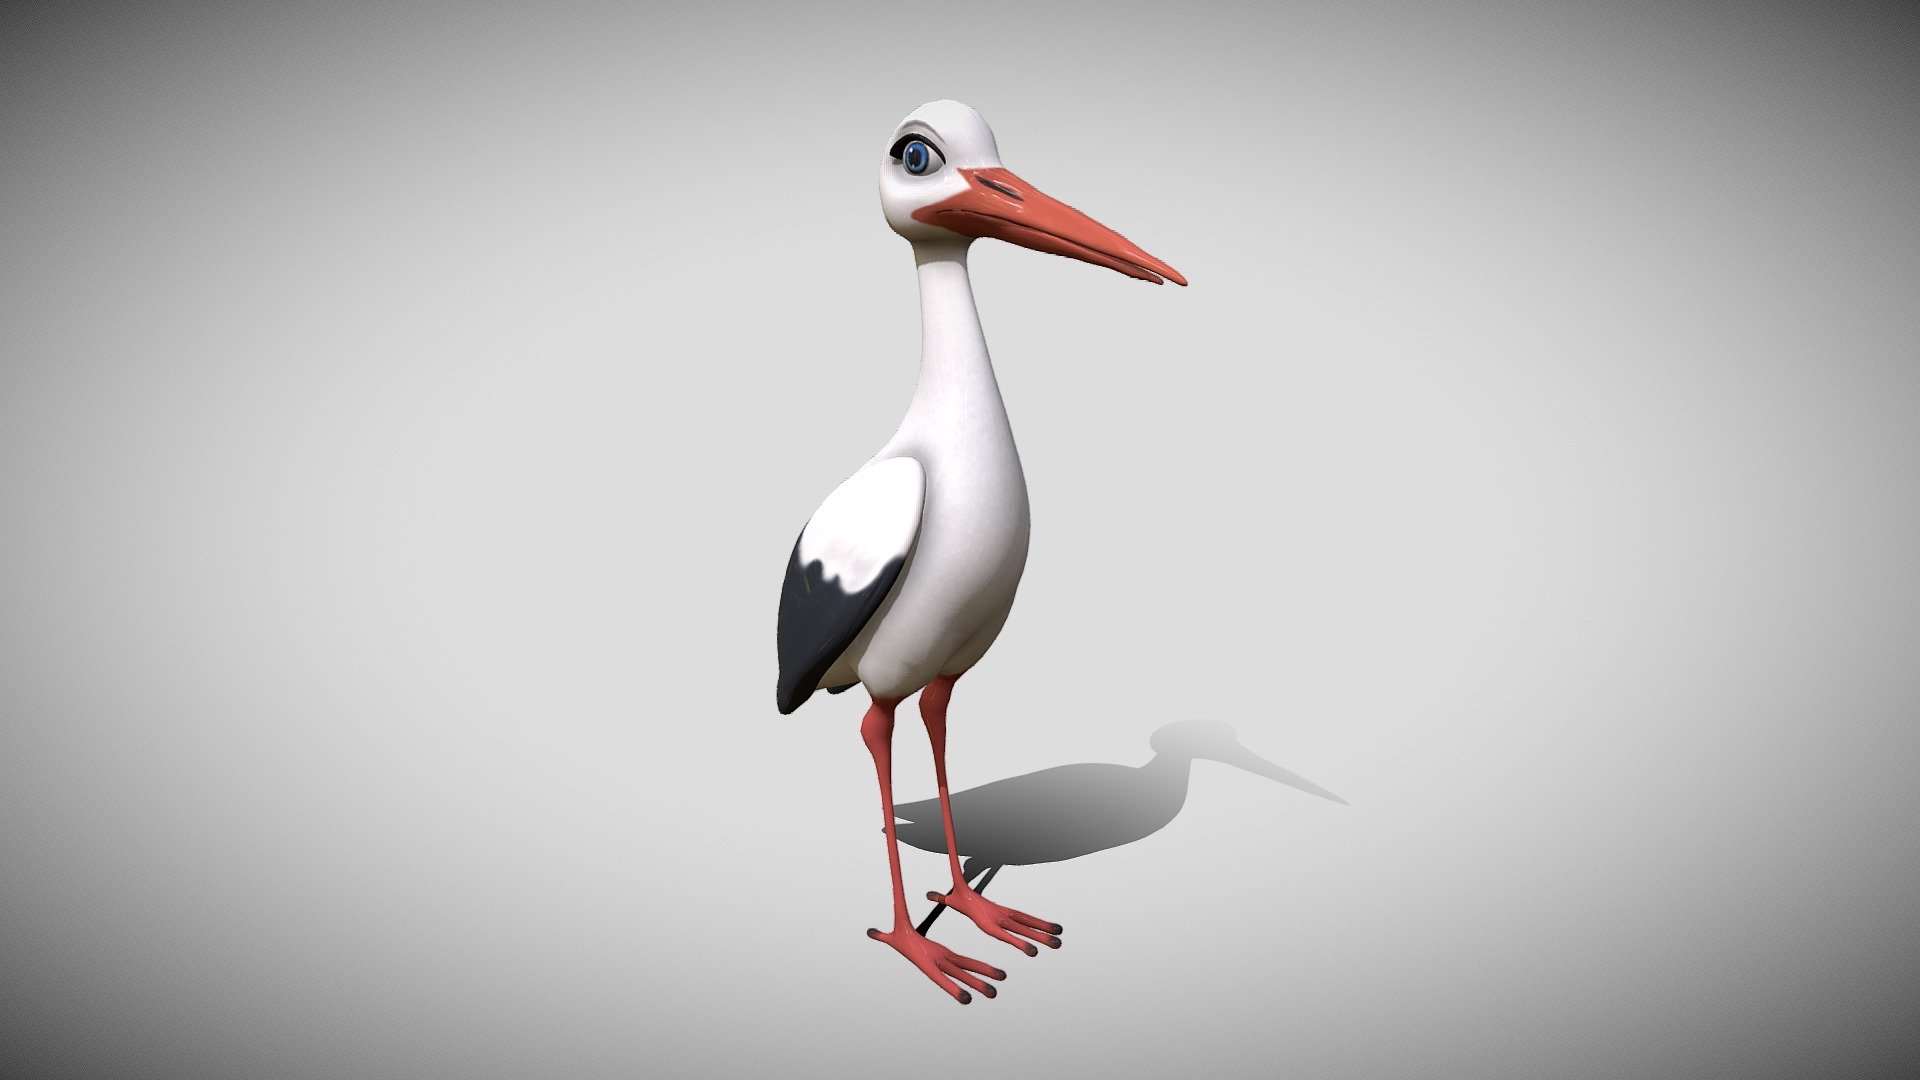 Model of cartoon stork

originaly modeled with Zbrush 4r7

Features

-Model is completly unwrapped -Rigged with SKin modifier and CAT -Lowpoly model -Layered scene (lights,rigg,mesh) -Easy to animate -Optimal Vray settings -Hi ress textures -

Package

-Textures / Tiff format - 4k ressolution (diff, NM) -Models FBX,OBj and 3DS multy formats -Scenes - 3ds max scene (2012,2015) and Zbrush project

Preview images has rendered with Vray 3.0.0, snece have same render setting as u can see on preview, just open and render, BG colour can be easely changed

Model have real world scale

I hope u like it ! For more models just click on my name and browse library - cartoon stork - Buy Royalty Free 3D model by 3DAnvil 3d model